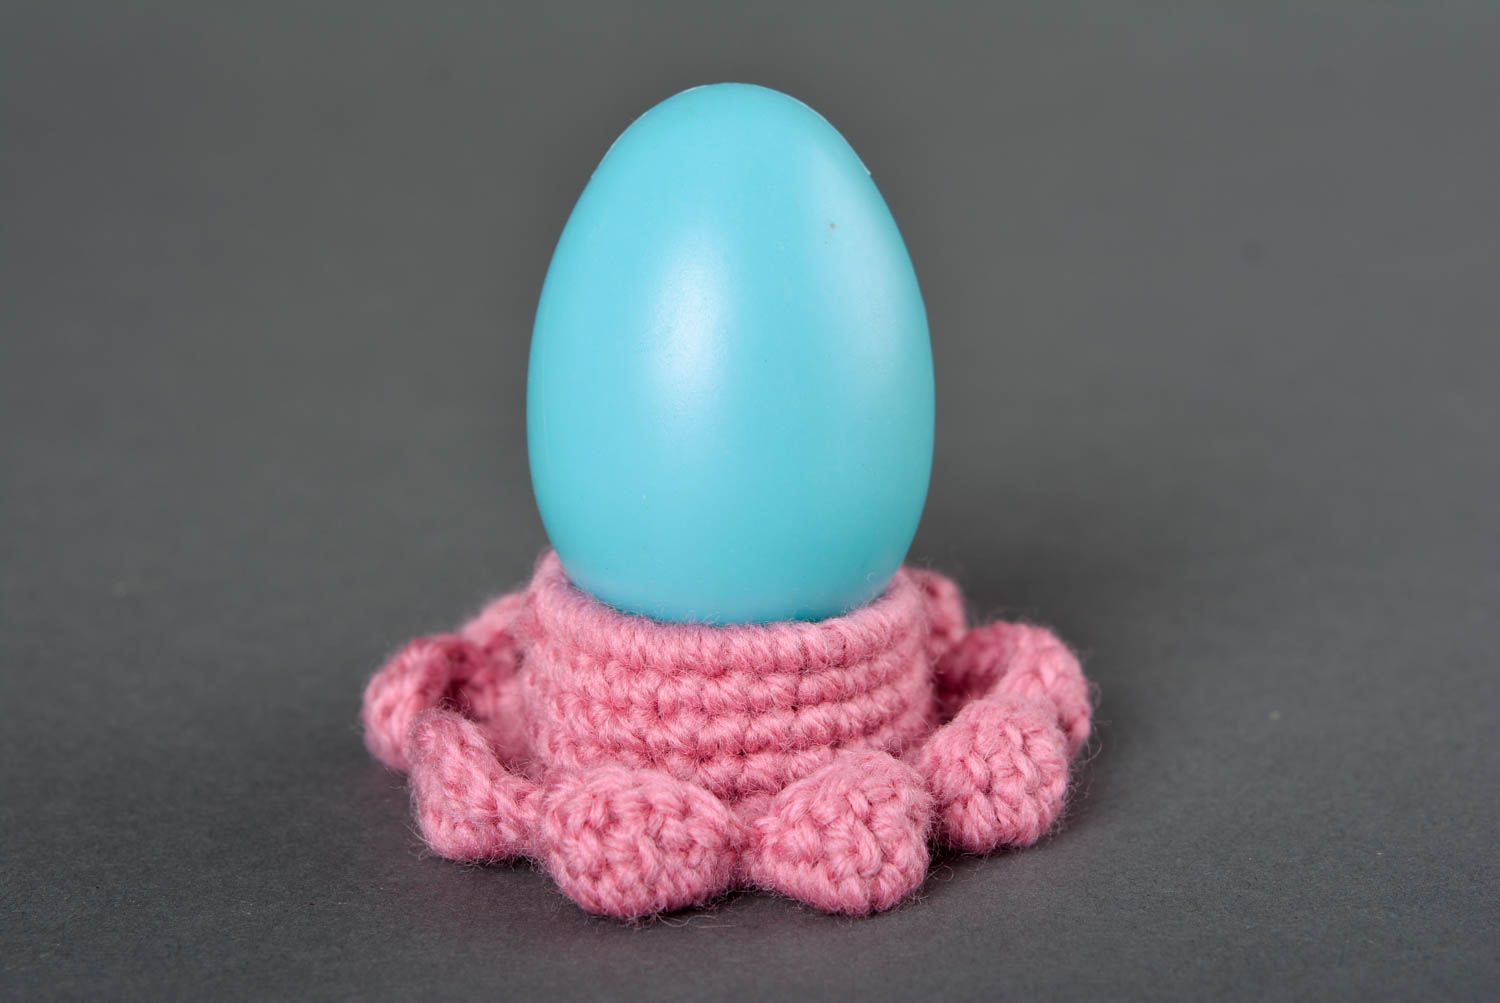 Handmade crocheted stand for eggs stylish home decor unusual Easter souvenir photo 1